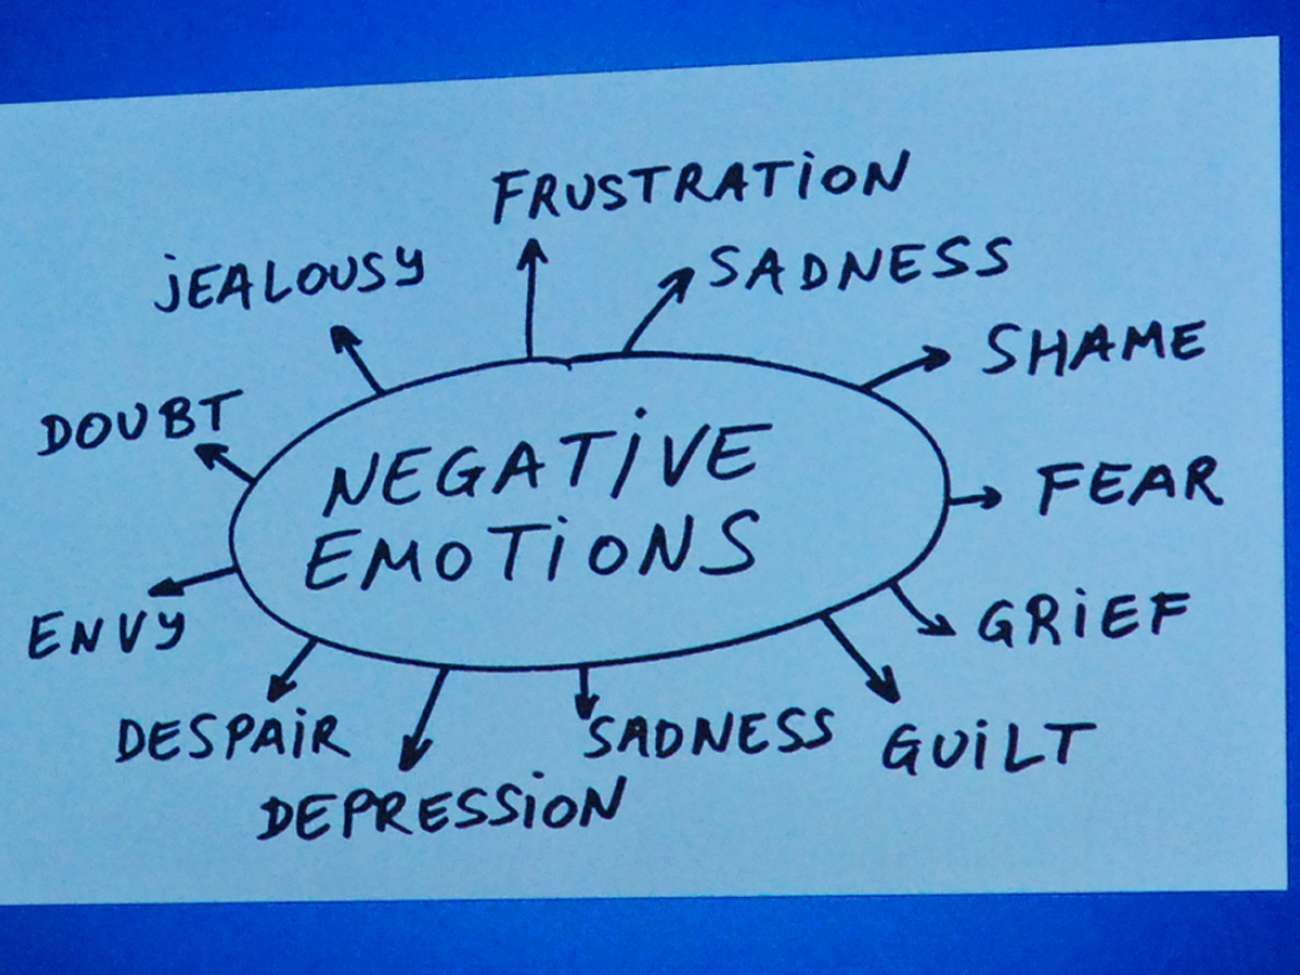 The myriad of symptoms and feelings that can appear when someone has depression.